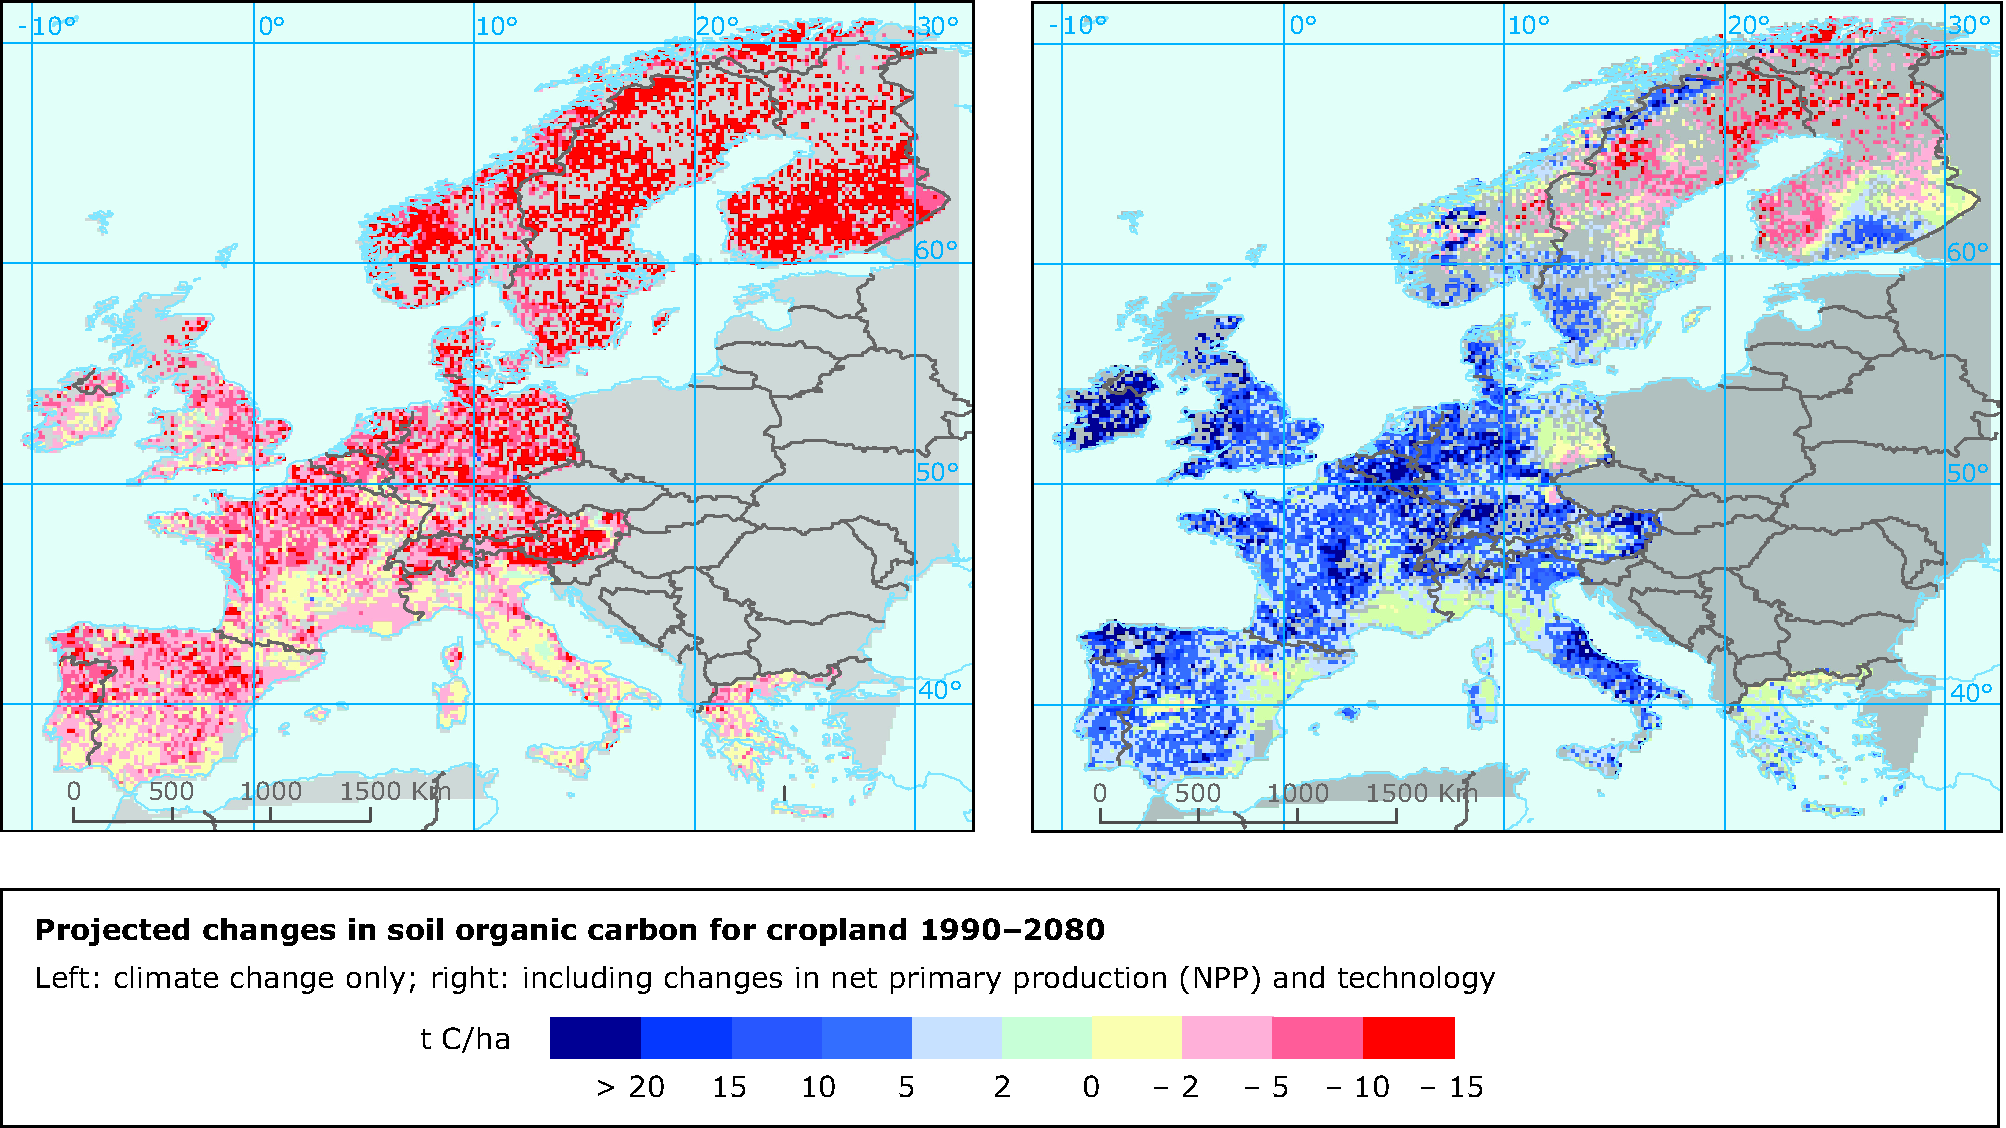 Projected changes in soil organic carbon for cropland 1990-2080